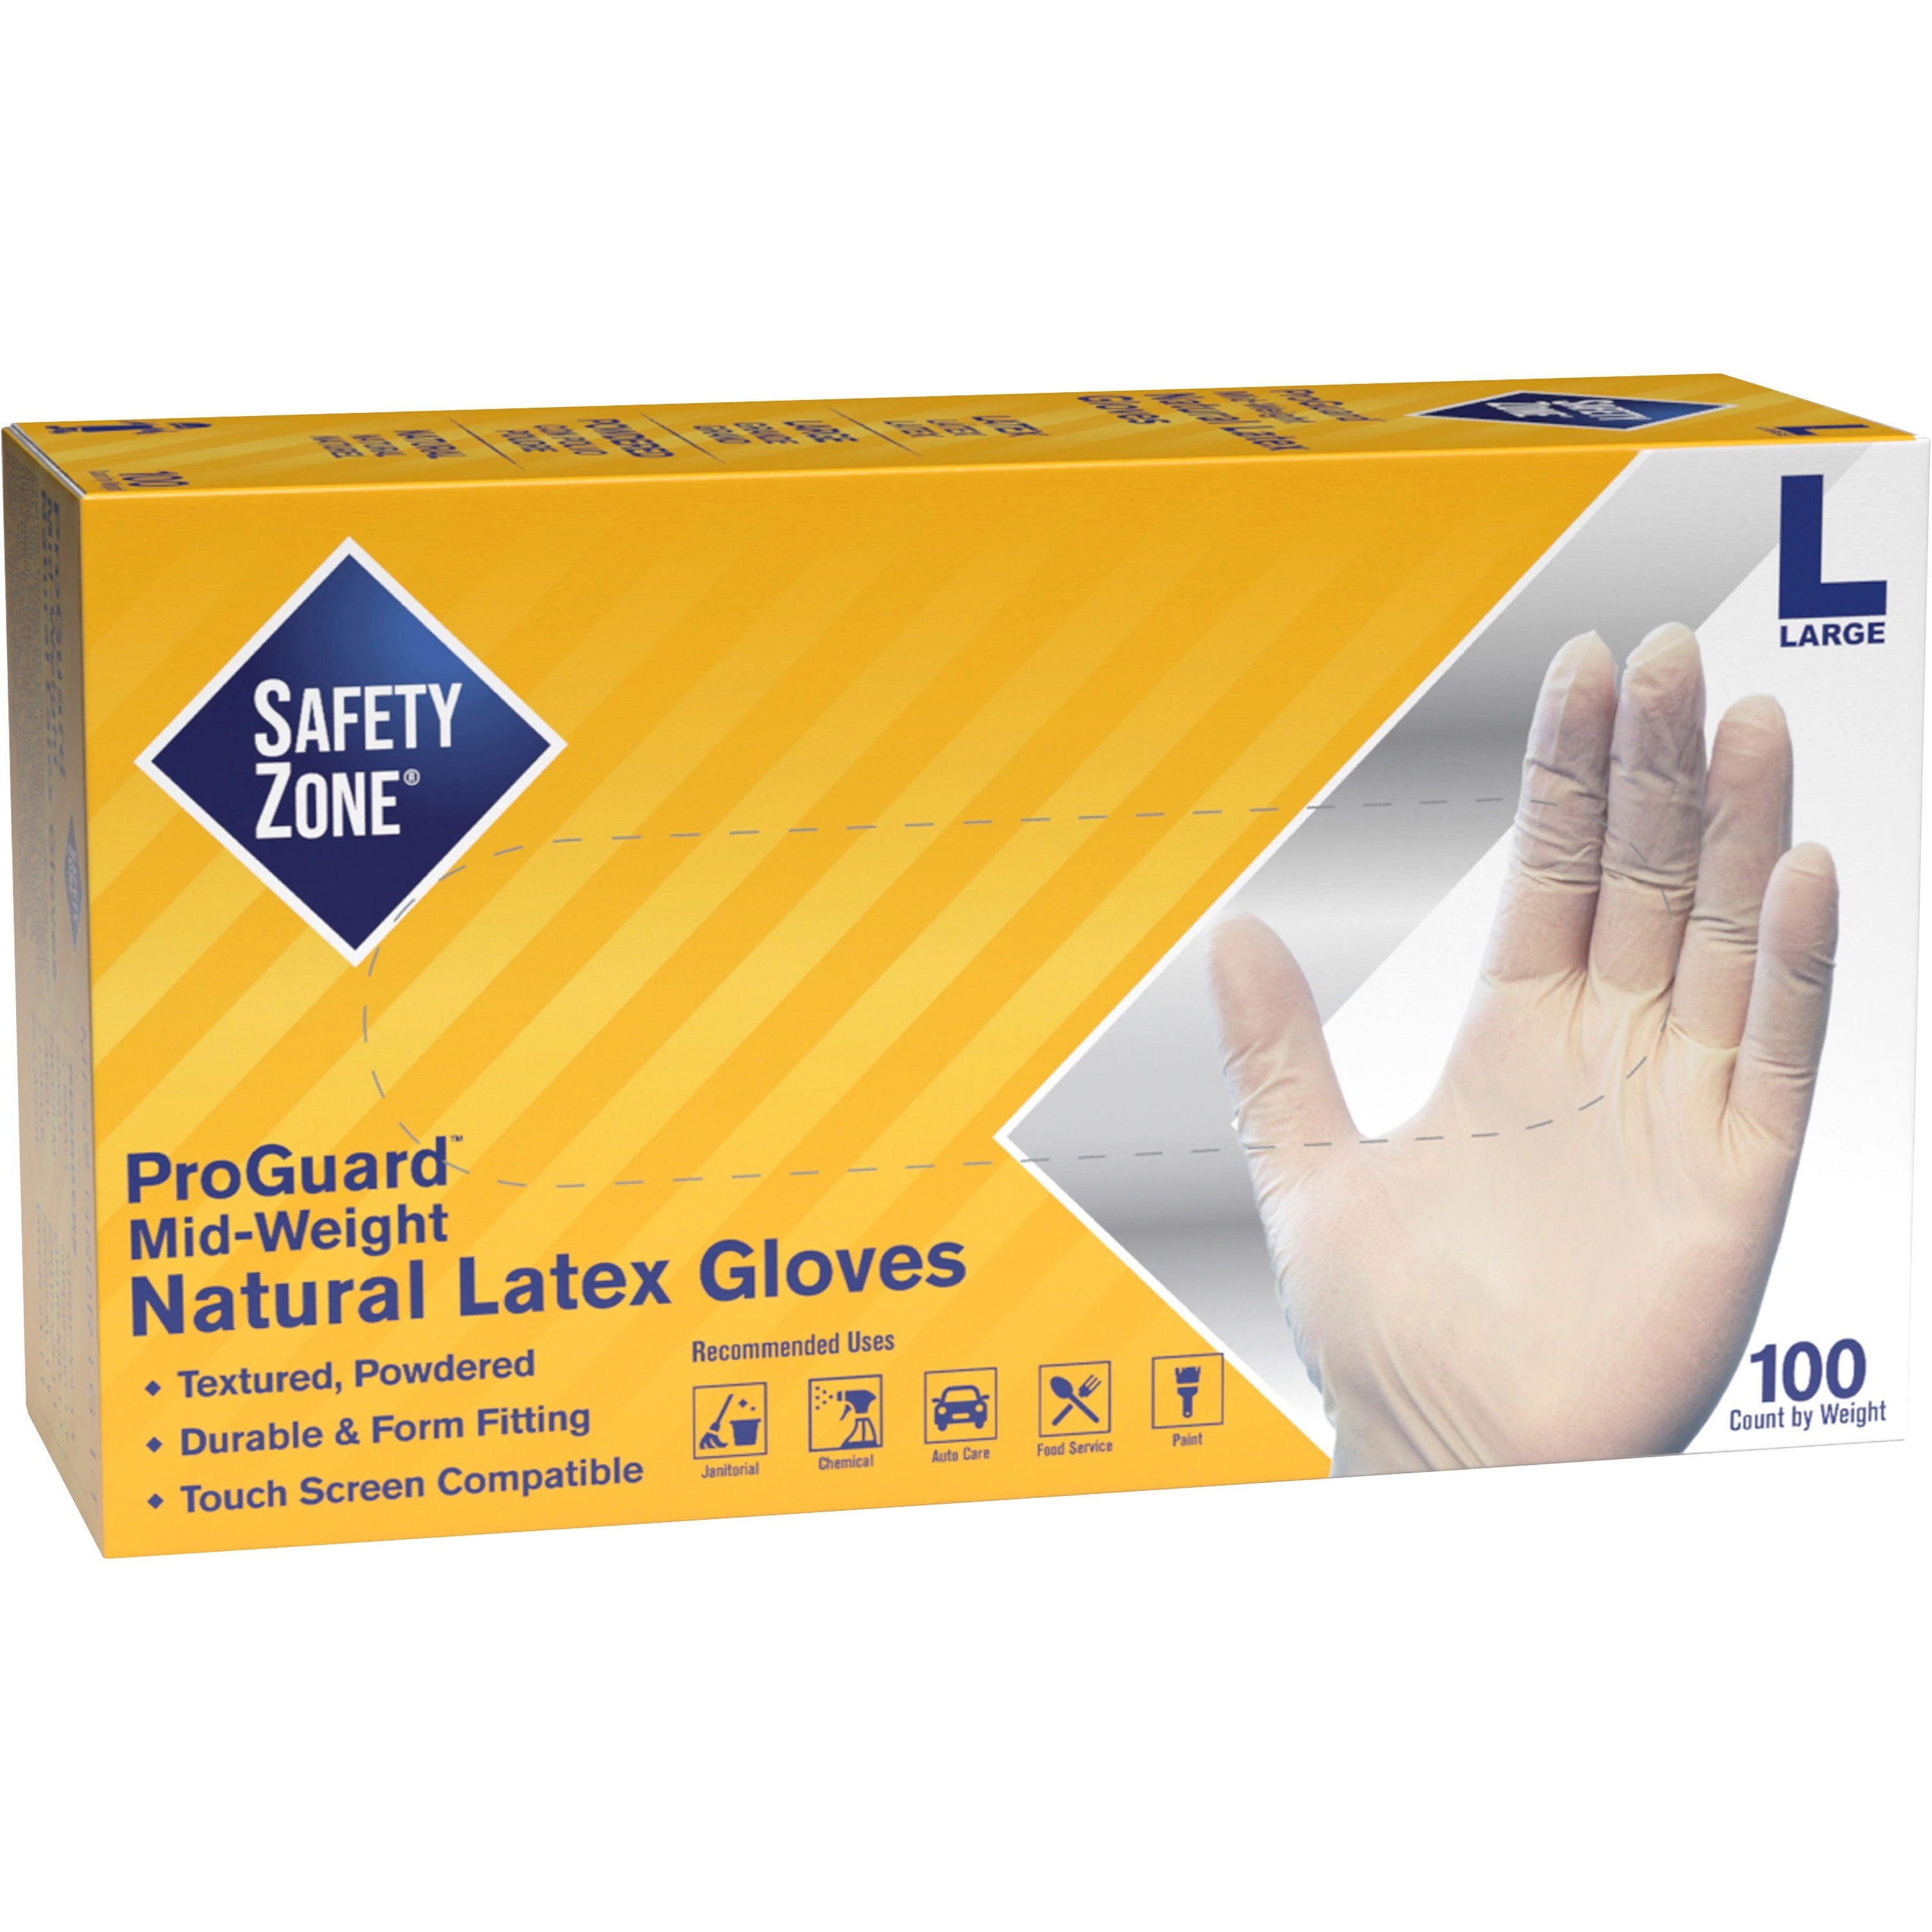 safety-zone-powdered-natural-latex-gloves-polymer-coating-large-size-natural-allergen-free-silicone-free-powdered-965-glove-length_szngrdrlg1t - 1